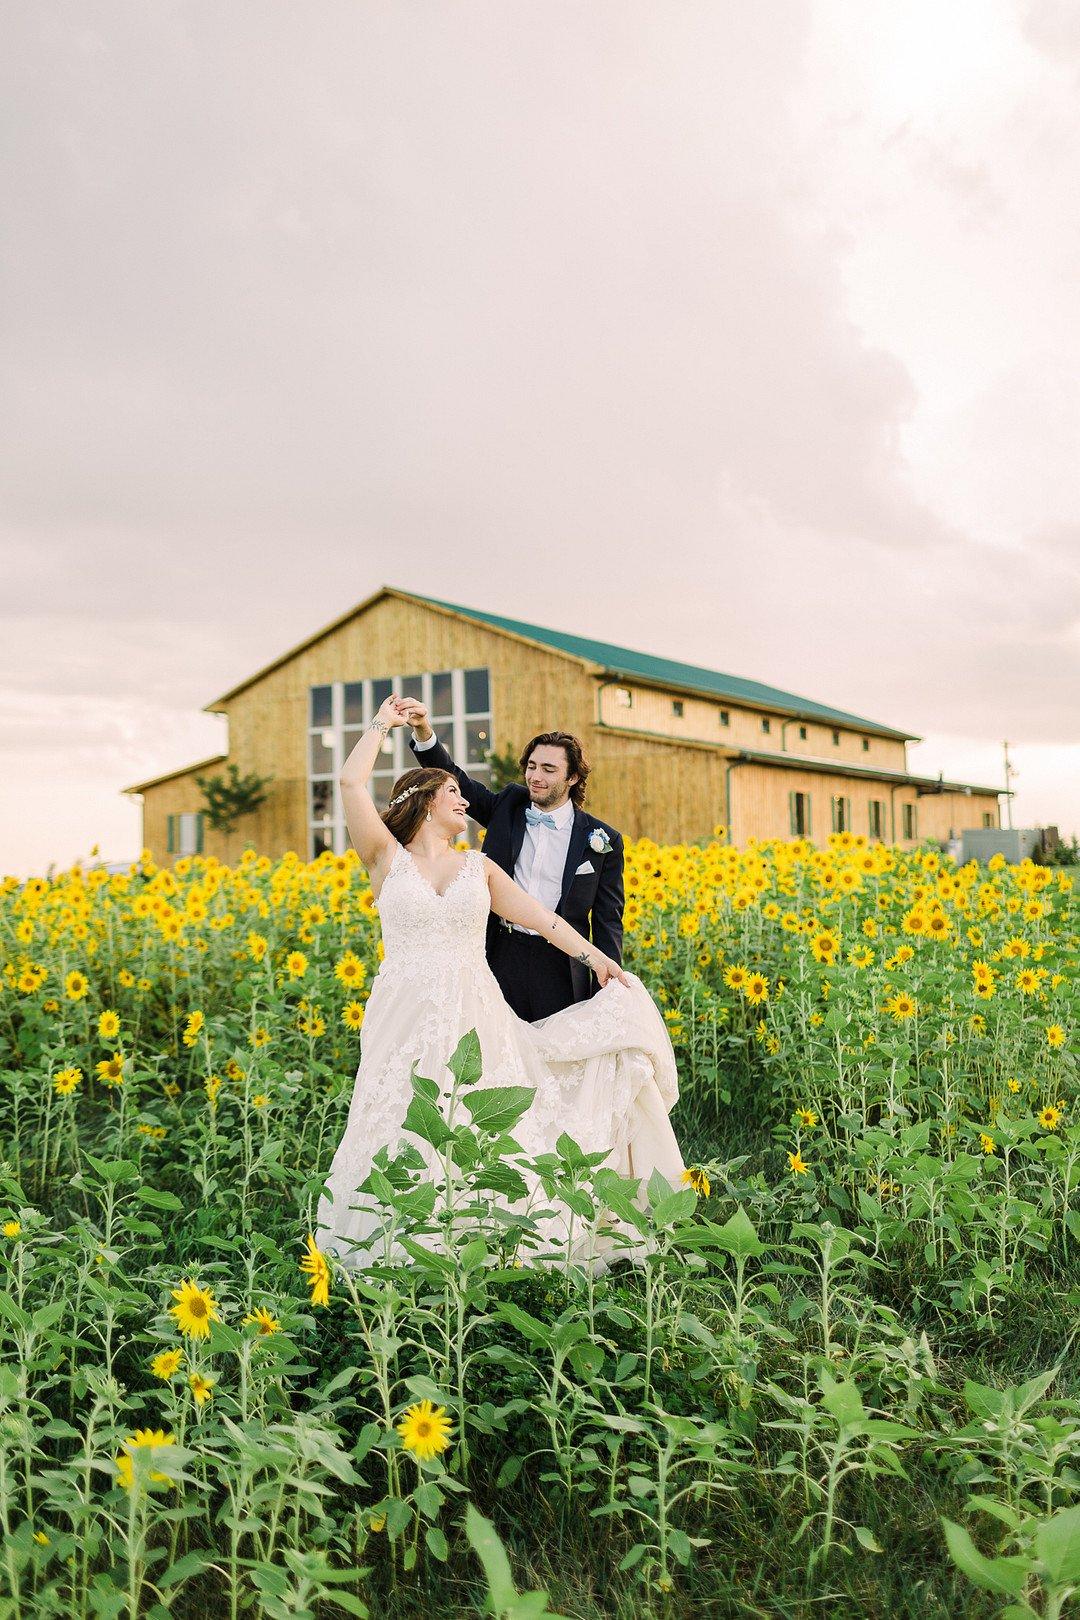 groom twirls bride in a field of sunflowers with barn wedding venue behind them in the distance